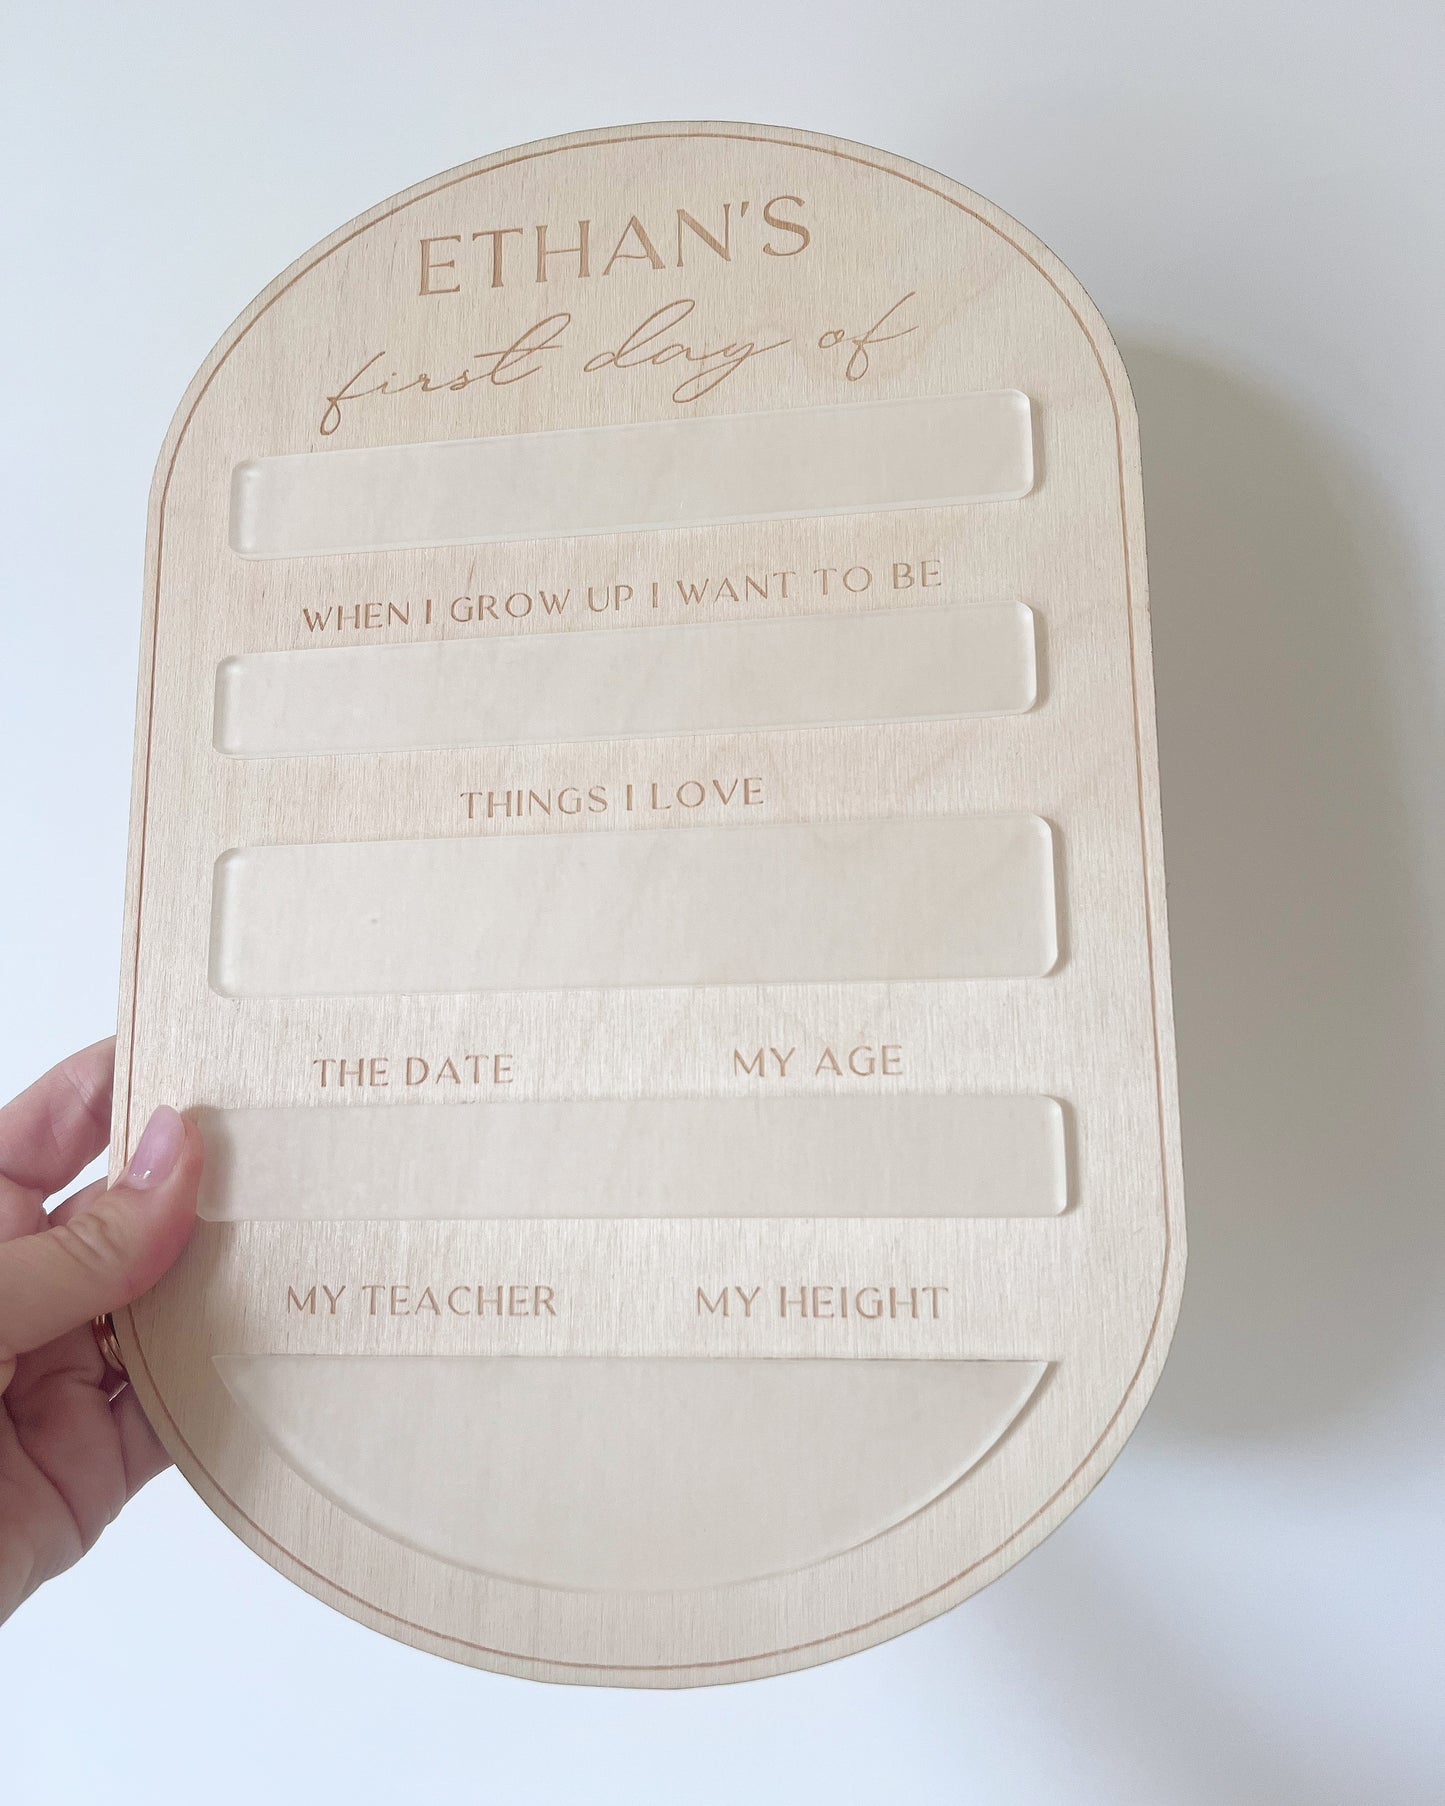 Personalised first day board oval shape with frosted acrylic